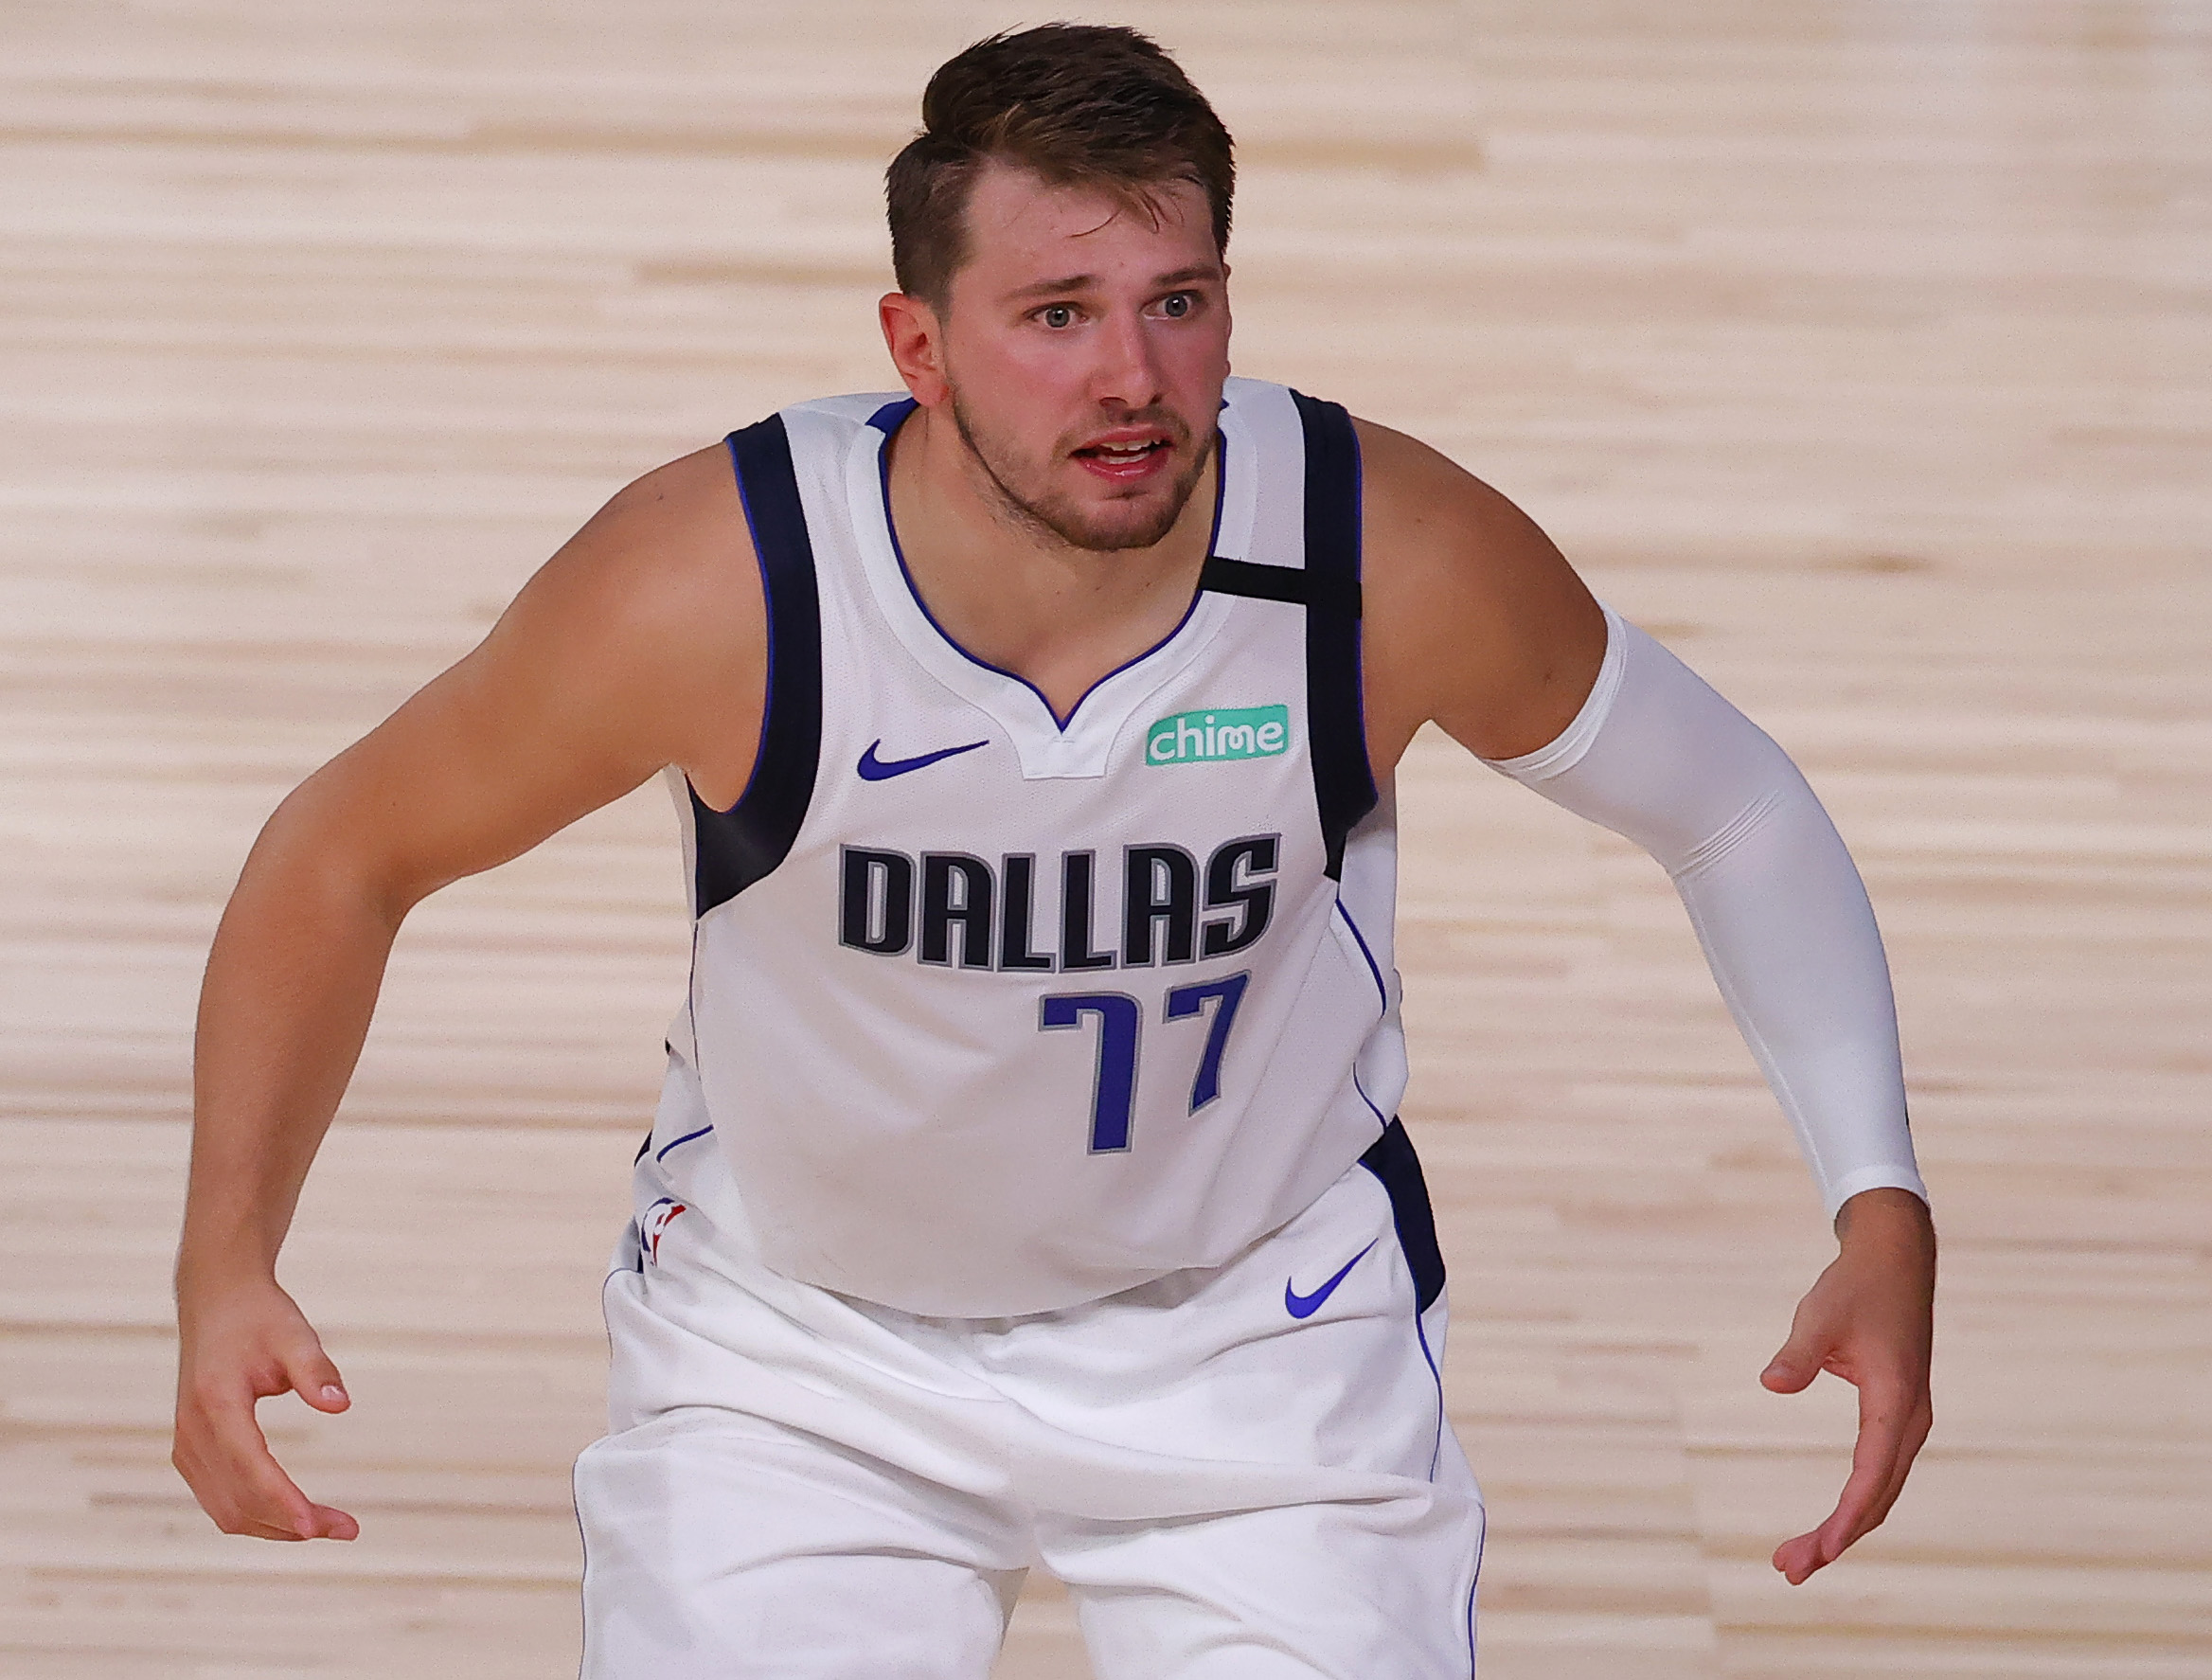 Luka Doncic deals with social media trolls and agrees with some of them.